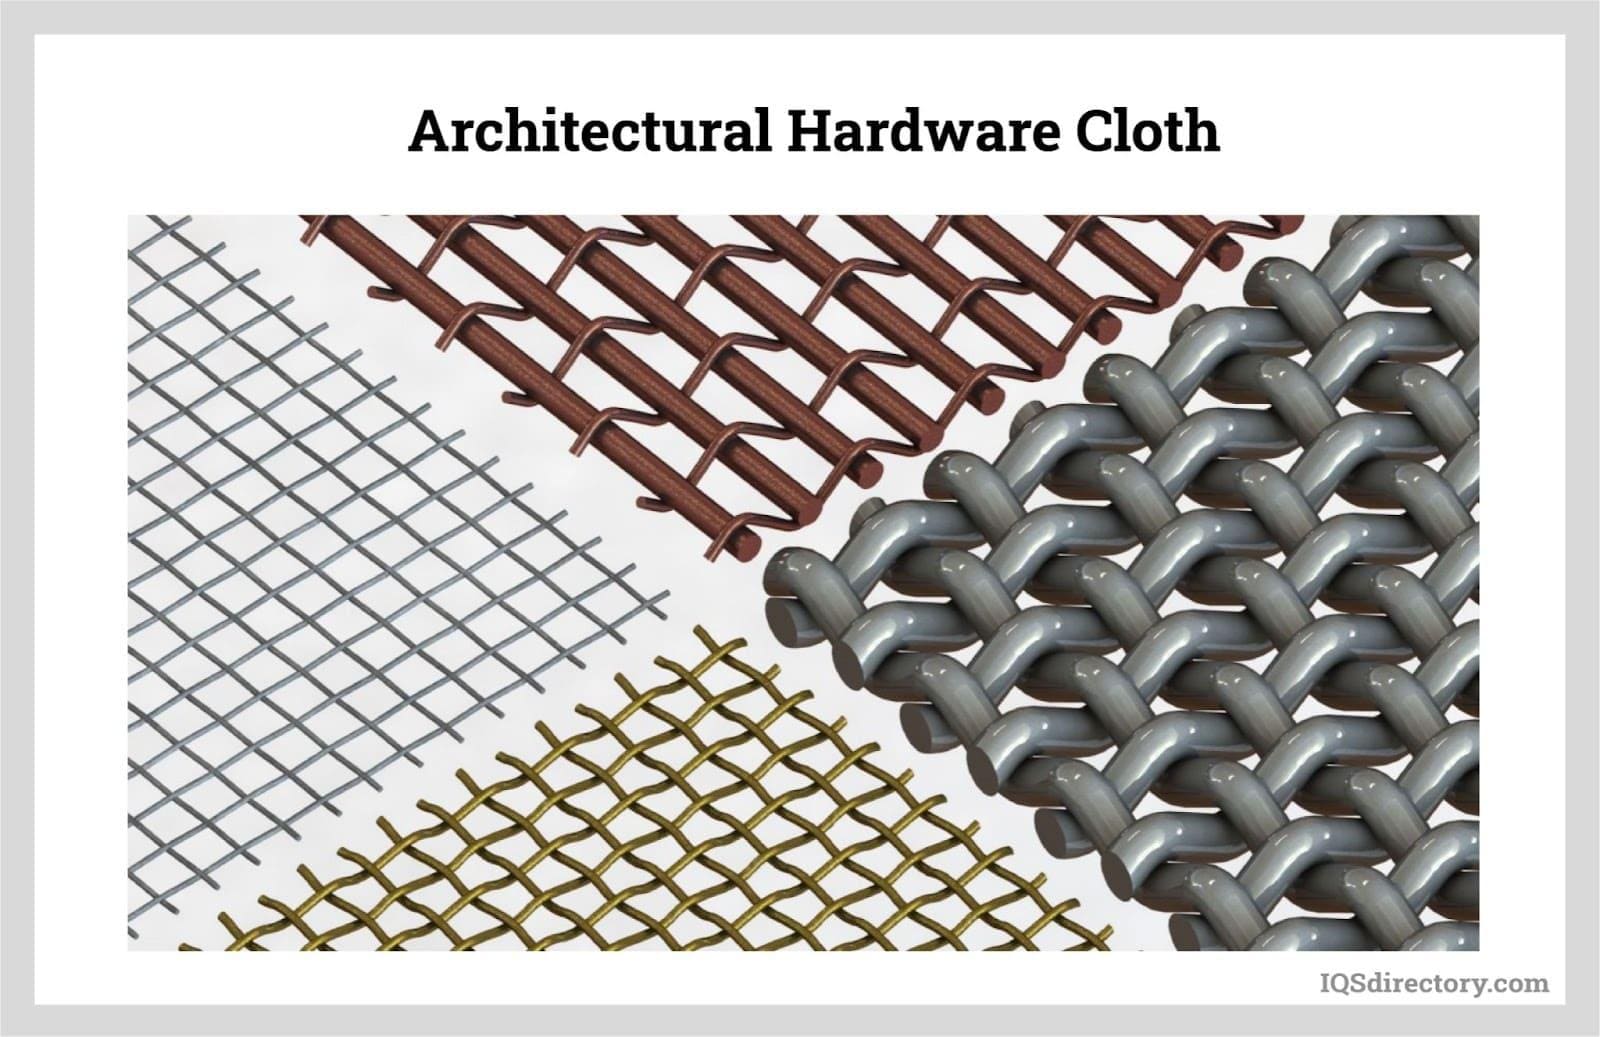 Stainless Steel Crimped Woven Mesh for Dectorative Metal Mesh